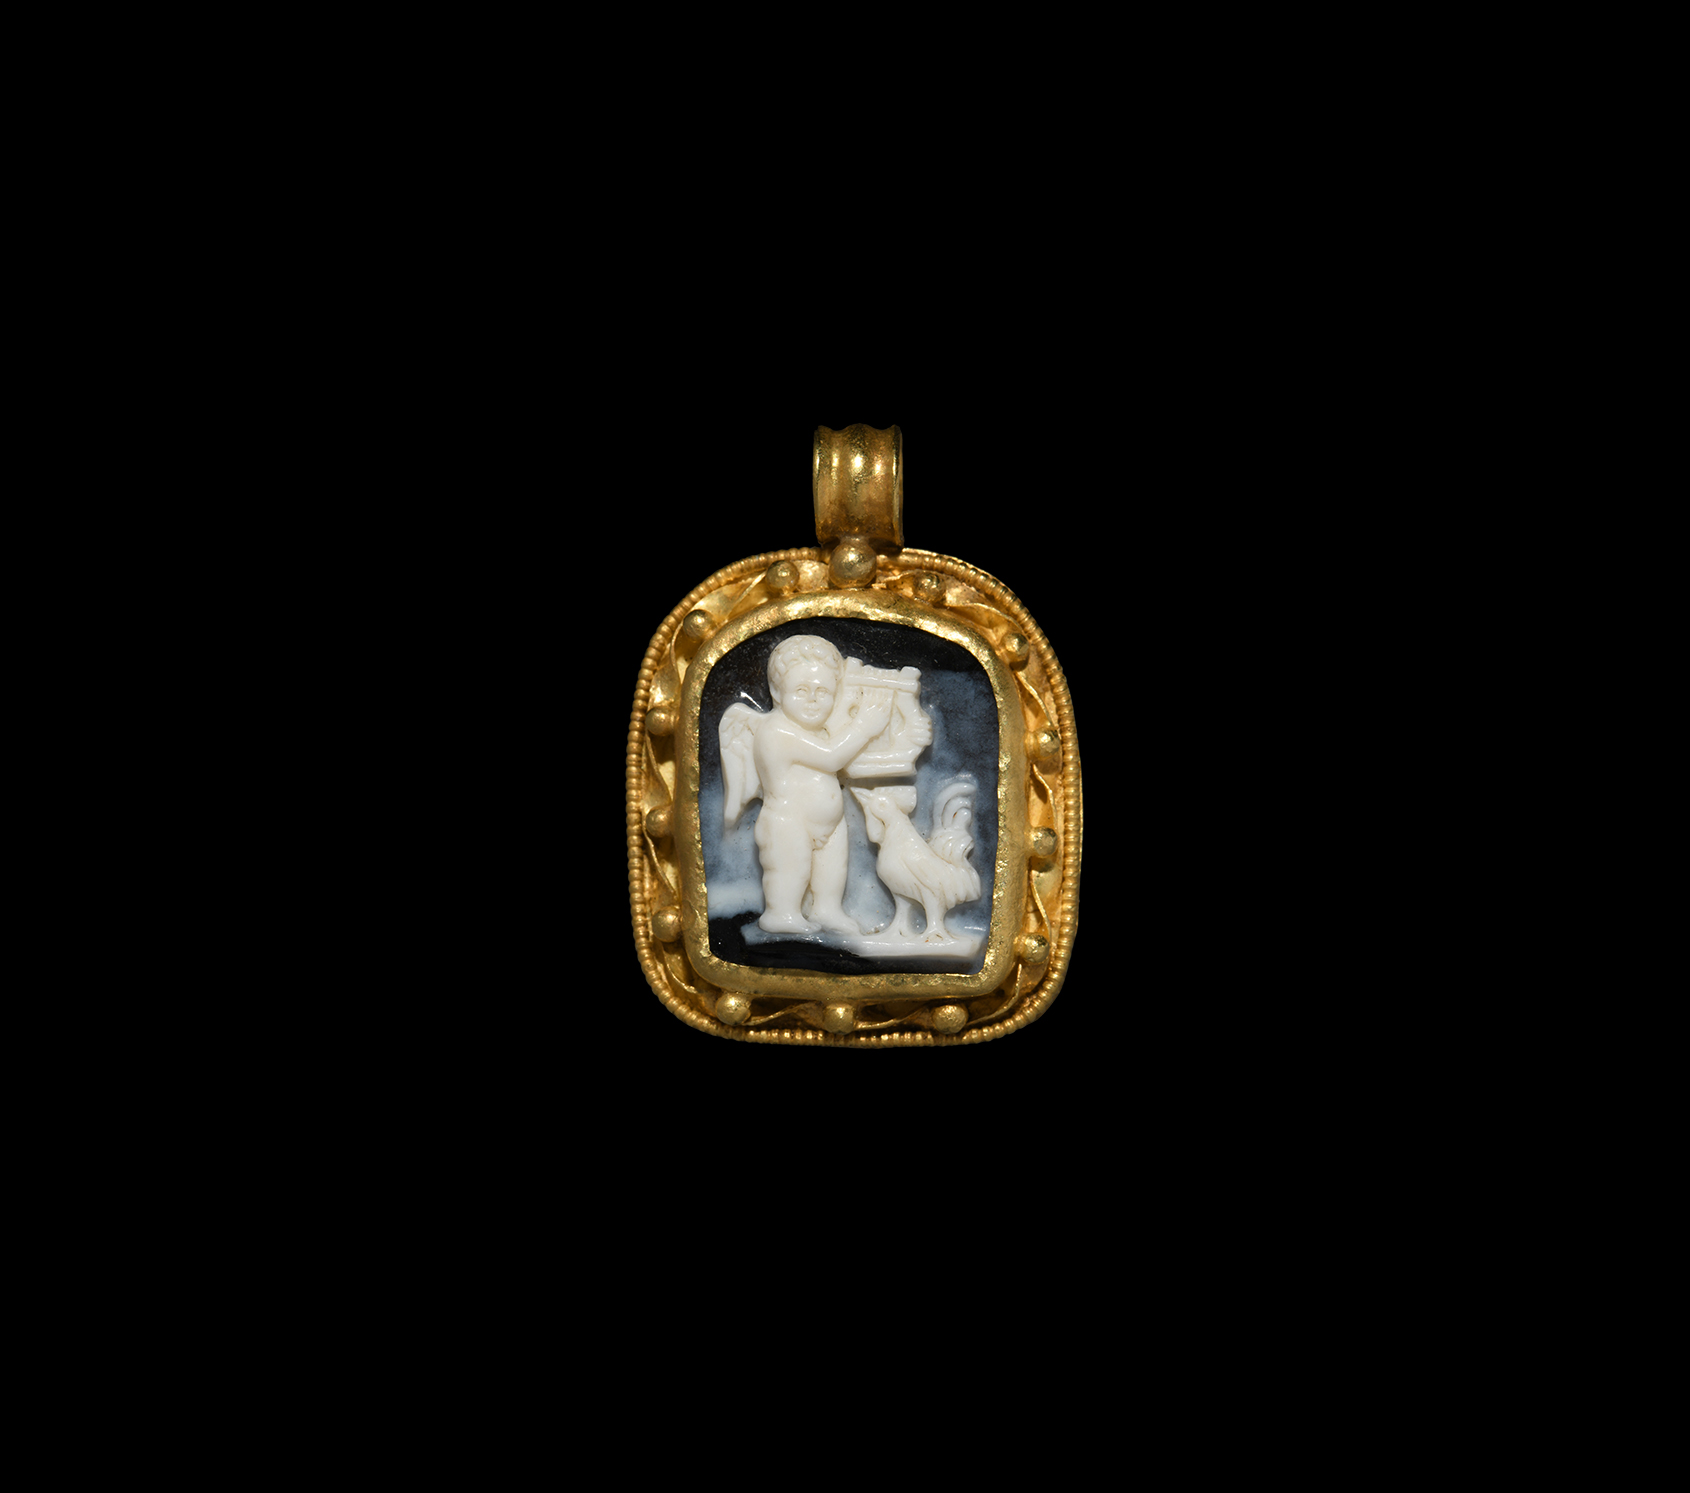 Roman Gold Cameo Pendant with Cupid Playing Harp